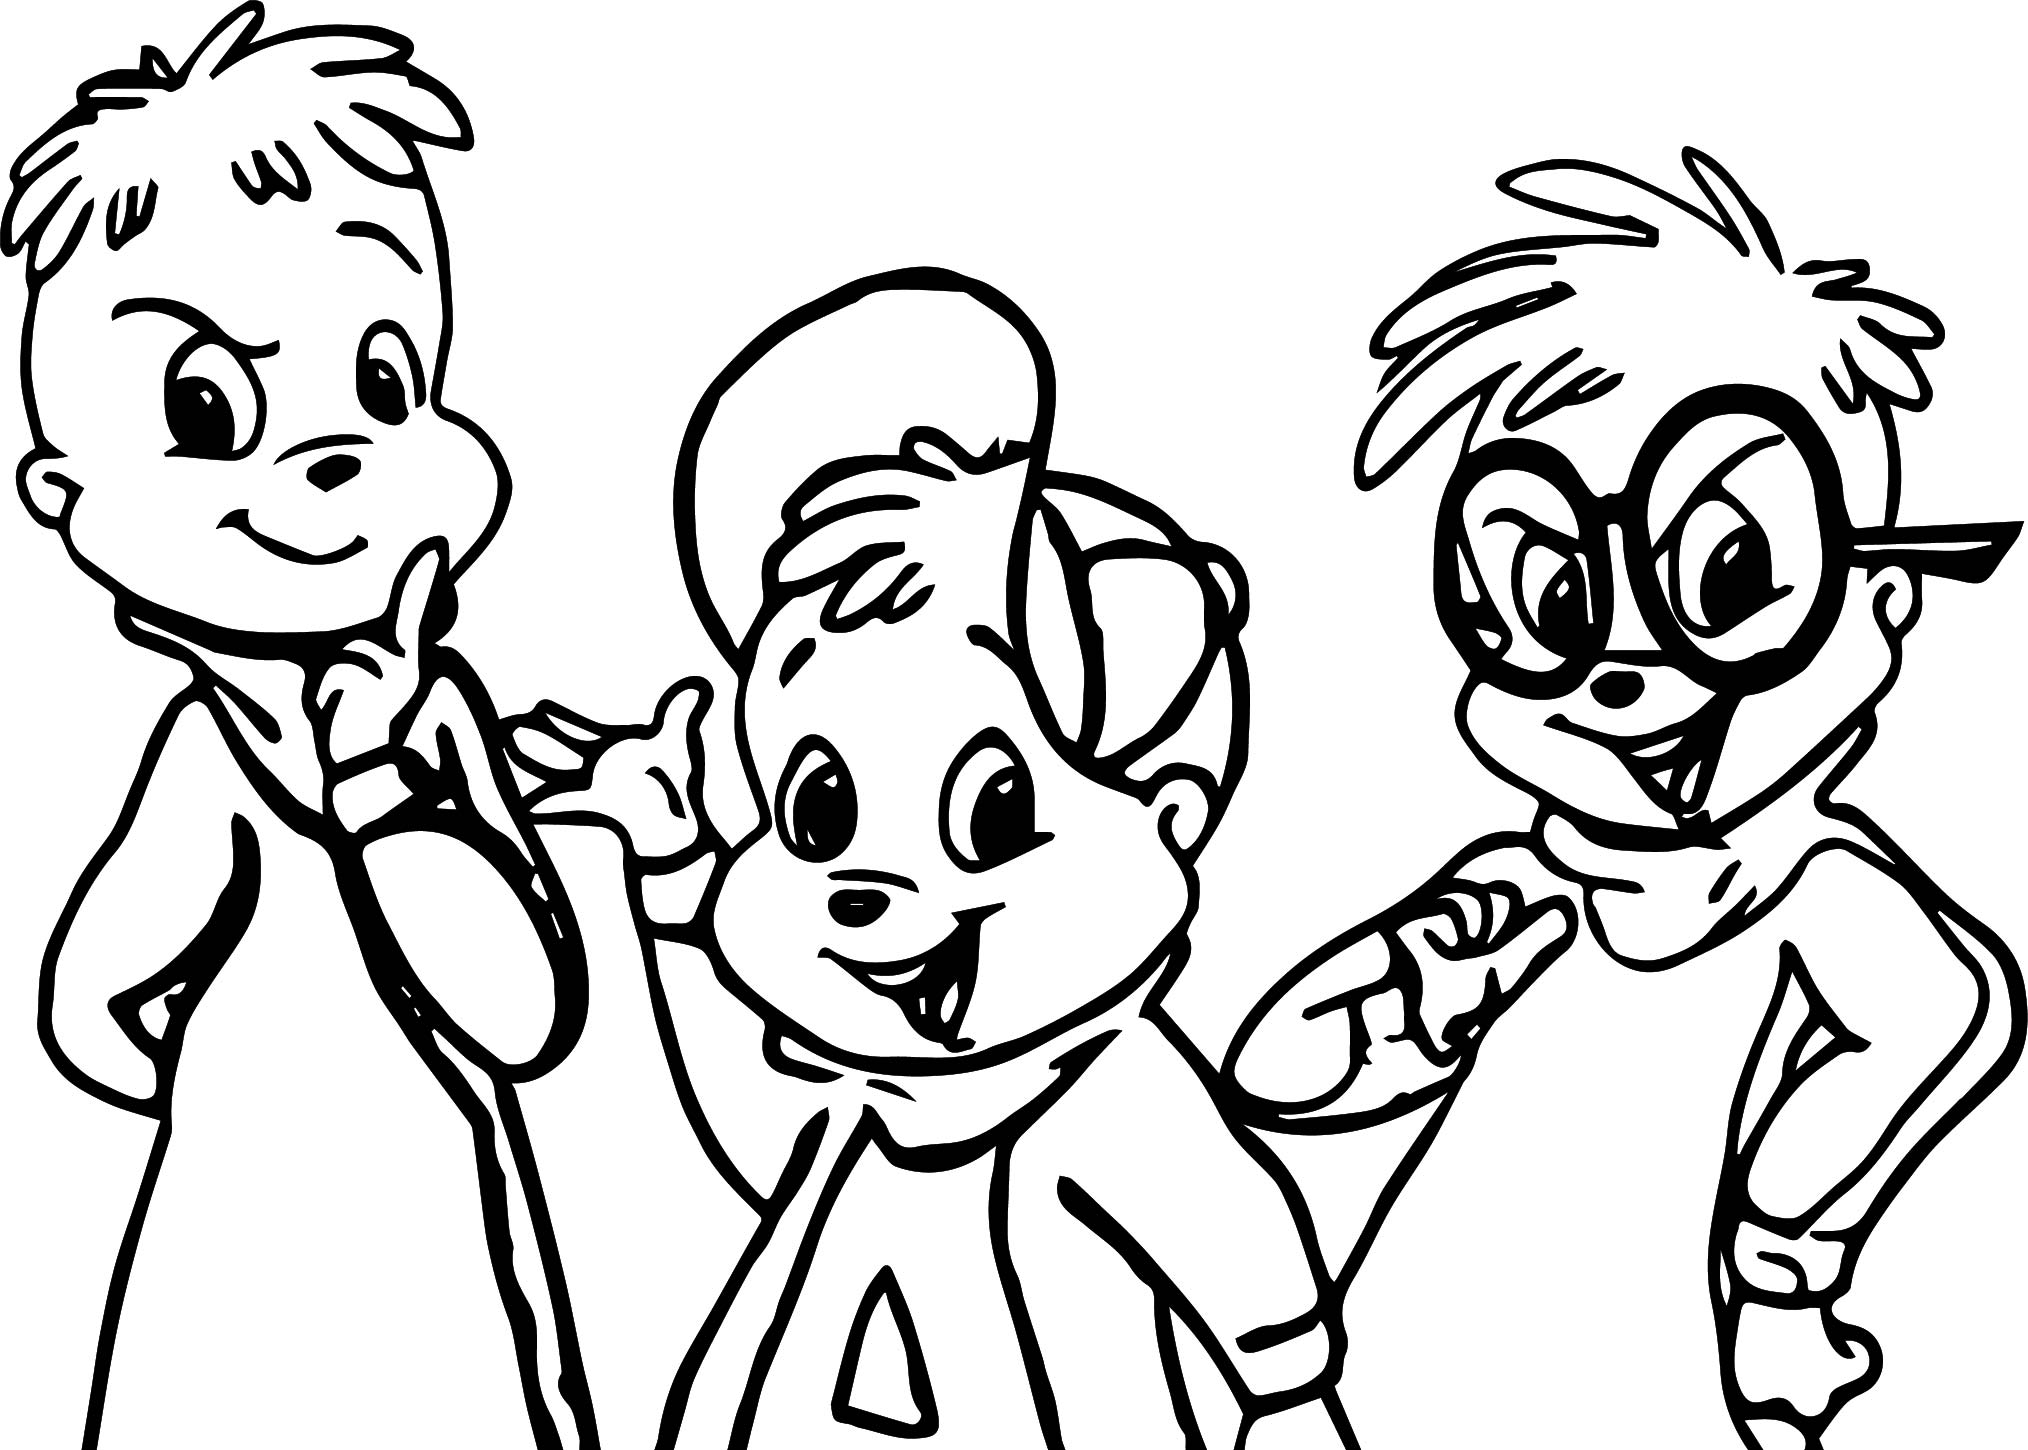 alvin-and-chipmunks-kid-coloring-page-wecoloringpage